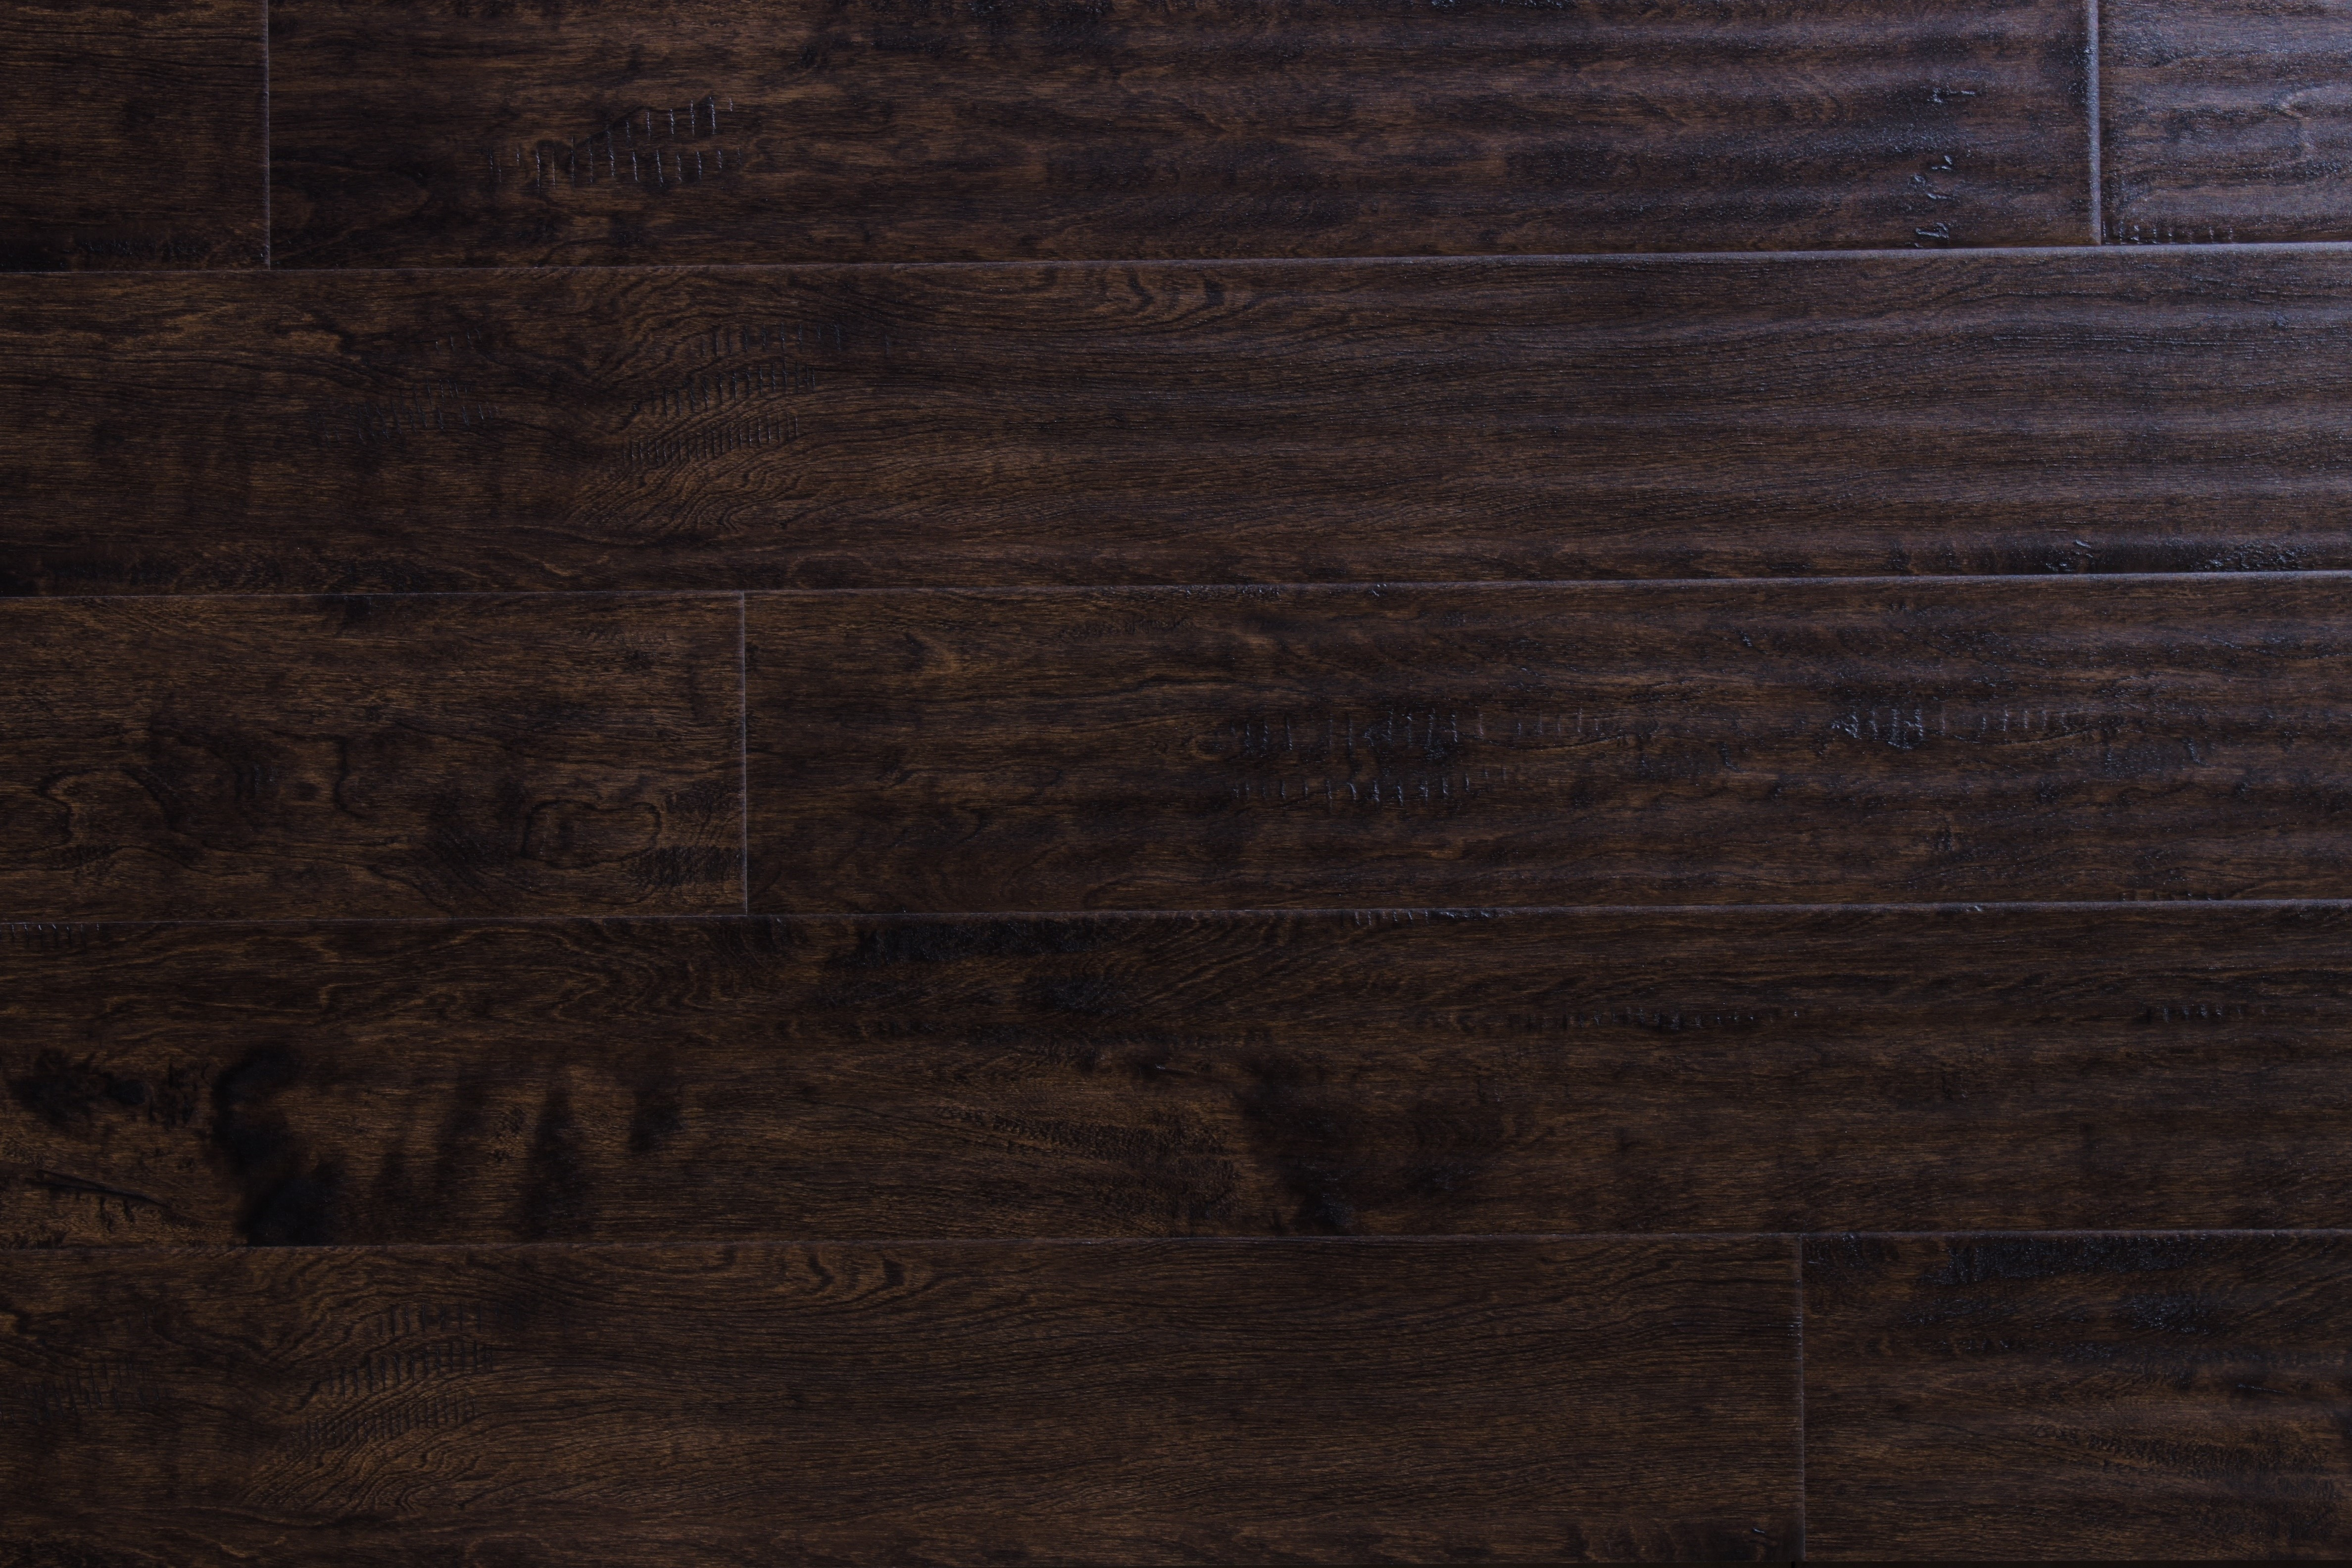 23 Spectacular Hardwood Floor Over Concrete 2024 free download hardwood floor over concrete of wood flooring free samples available at builddirecta intended for tailor multi gb 5874277bb8d3c